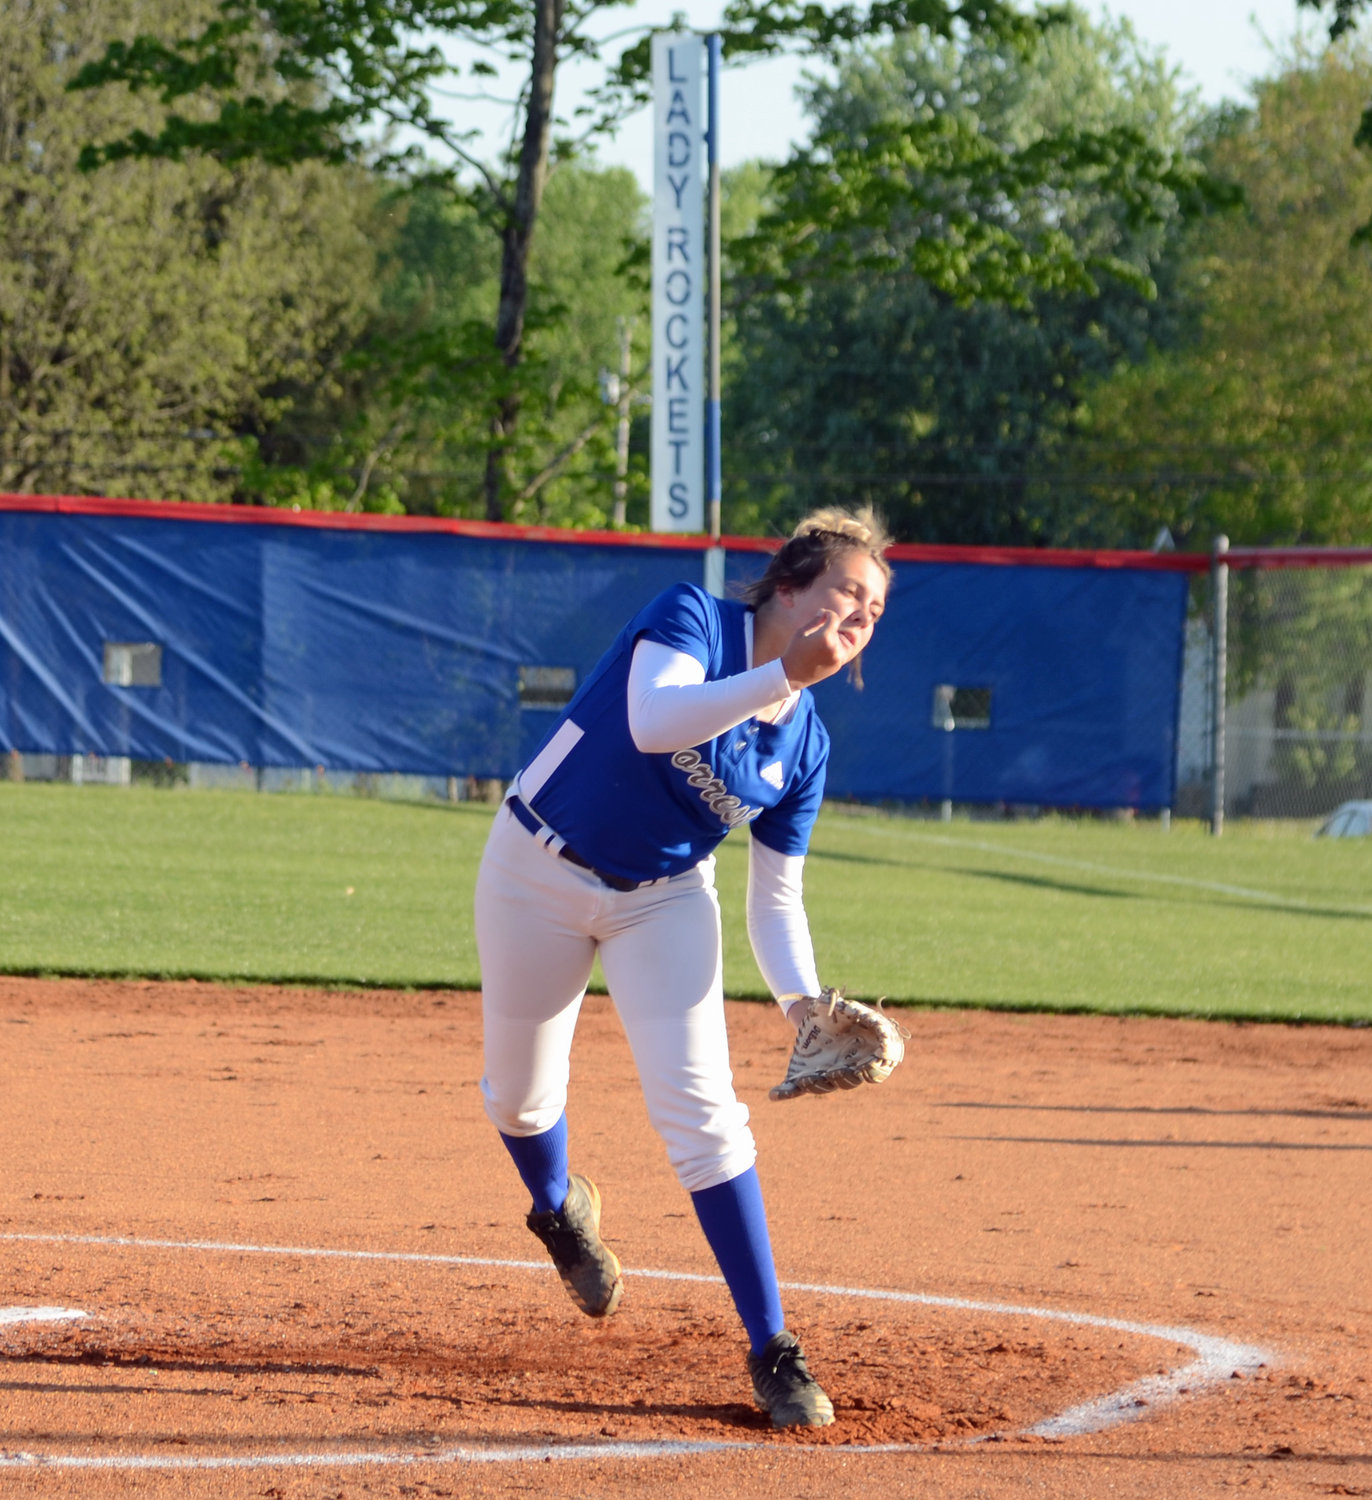 Julie Williams gave up three runs on four hits in the first four innings to pick up the win in the circle for the Lady Rockets.